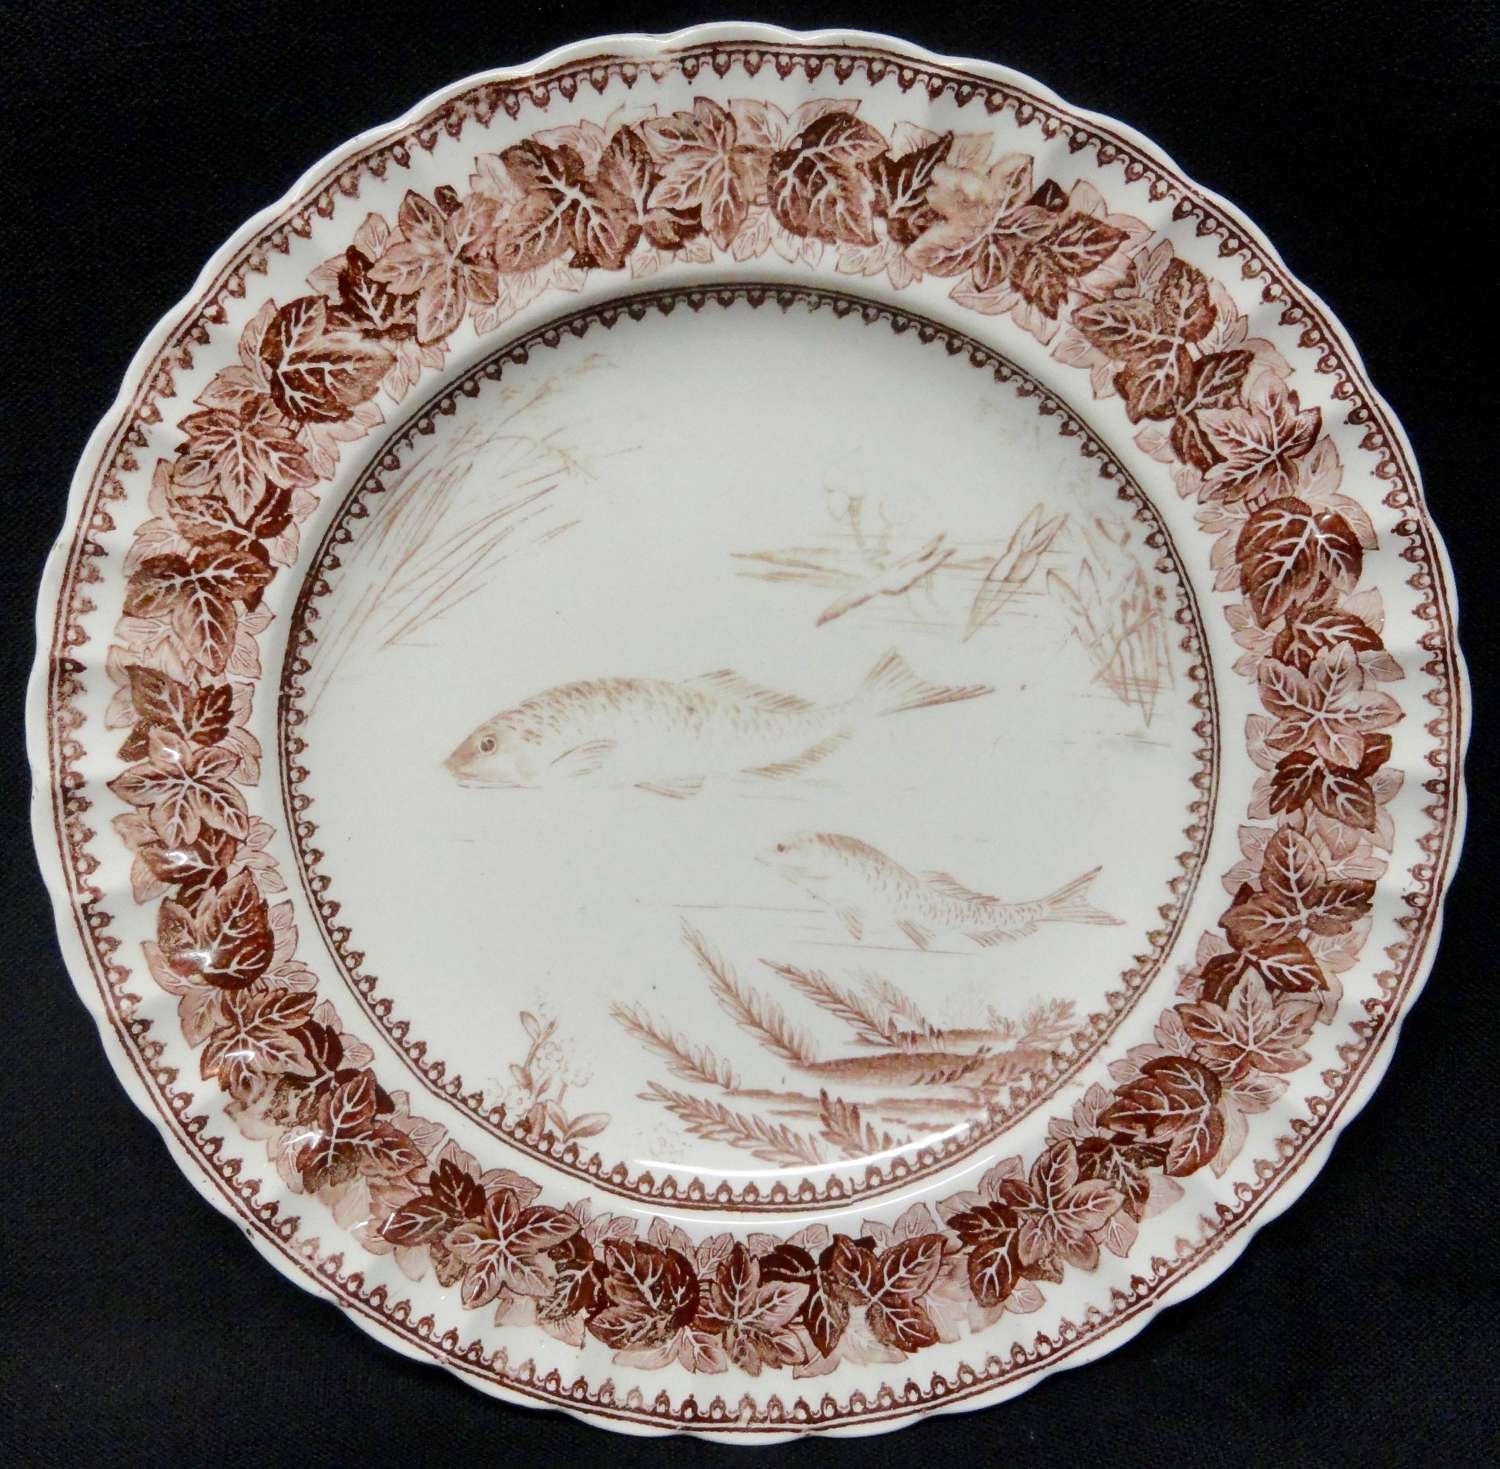 Ivy Leaf Copeland Brown Transfer Printed Plate ~ Fishes ~ 1883